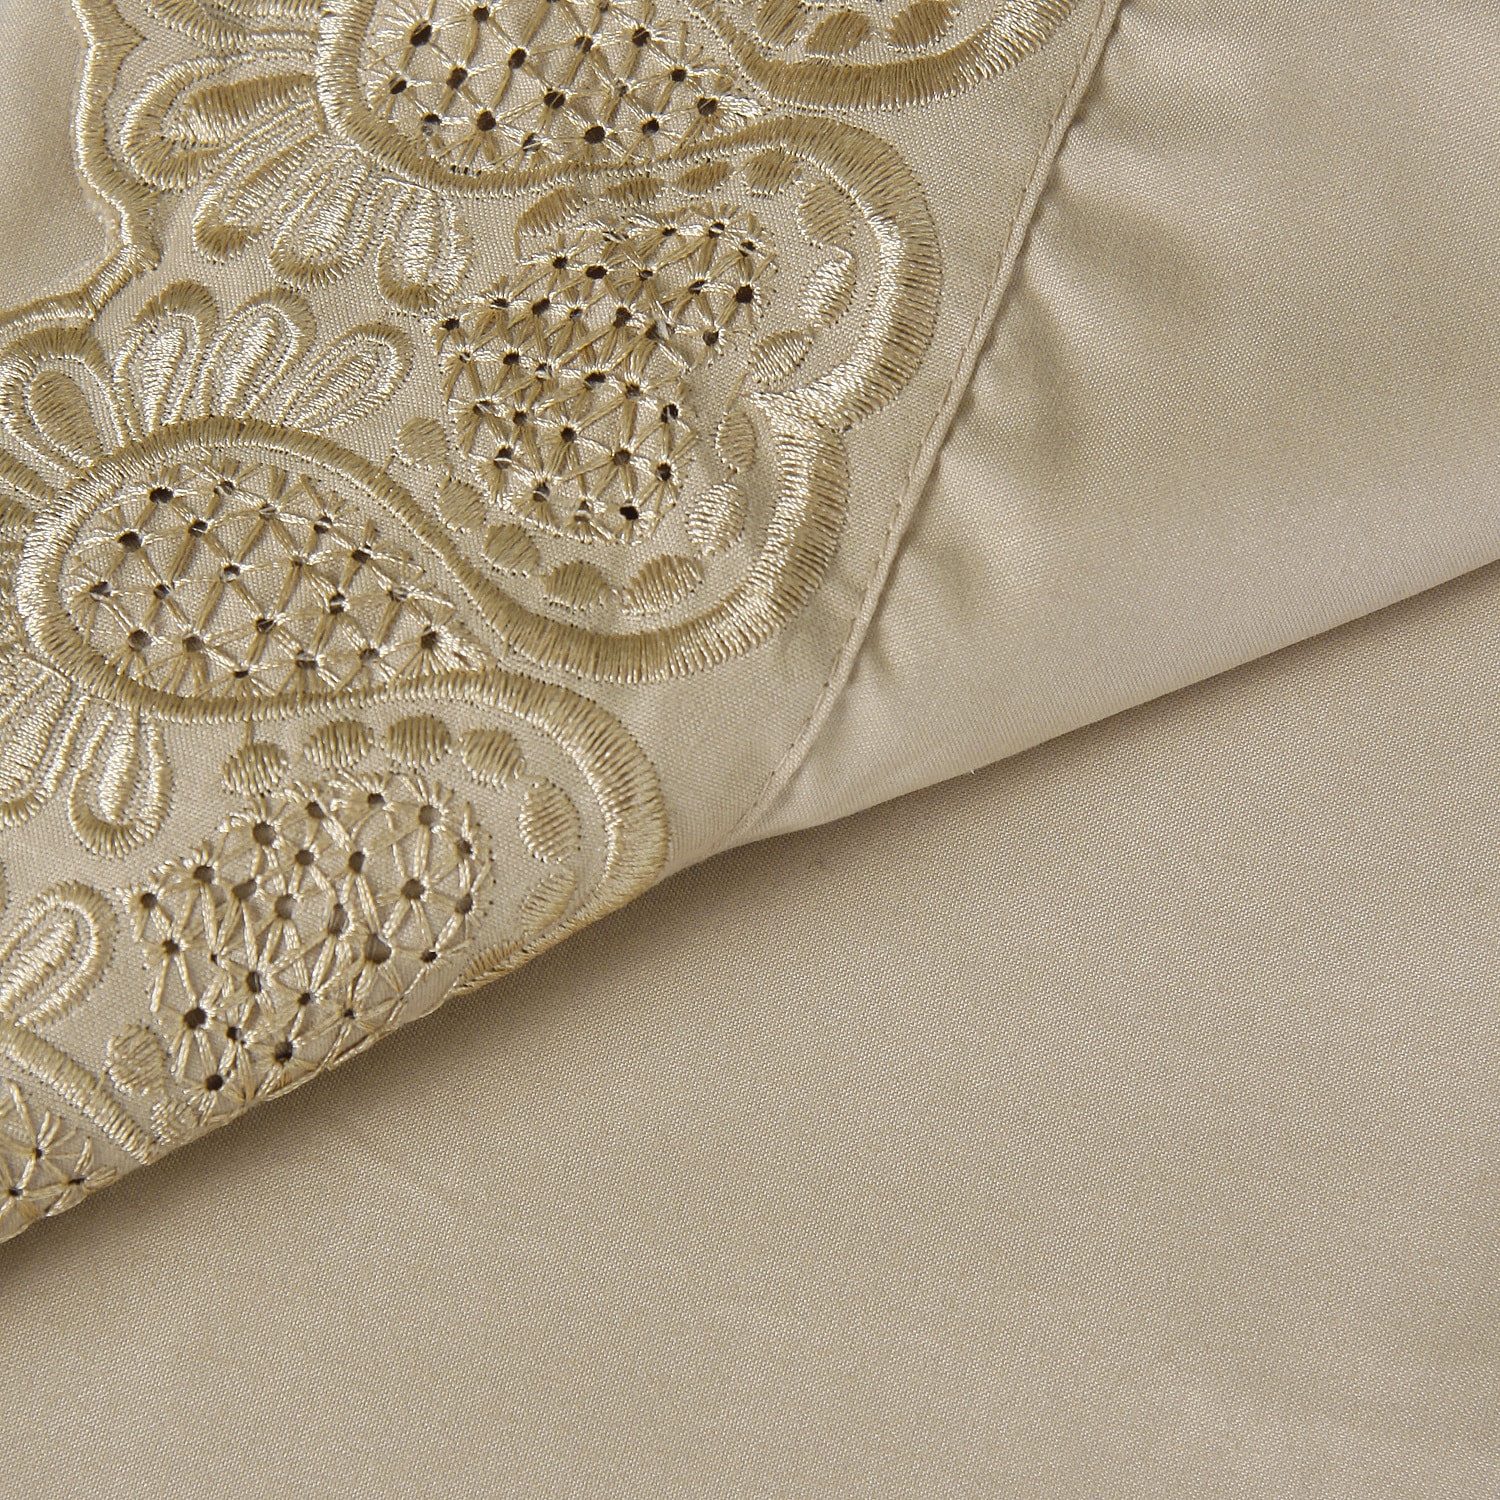 Elite Home Products, Inc Majestic Embroidered Lace Sheet Set Off White Size Full